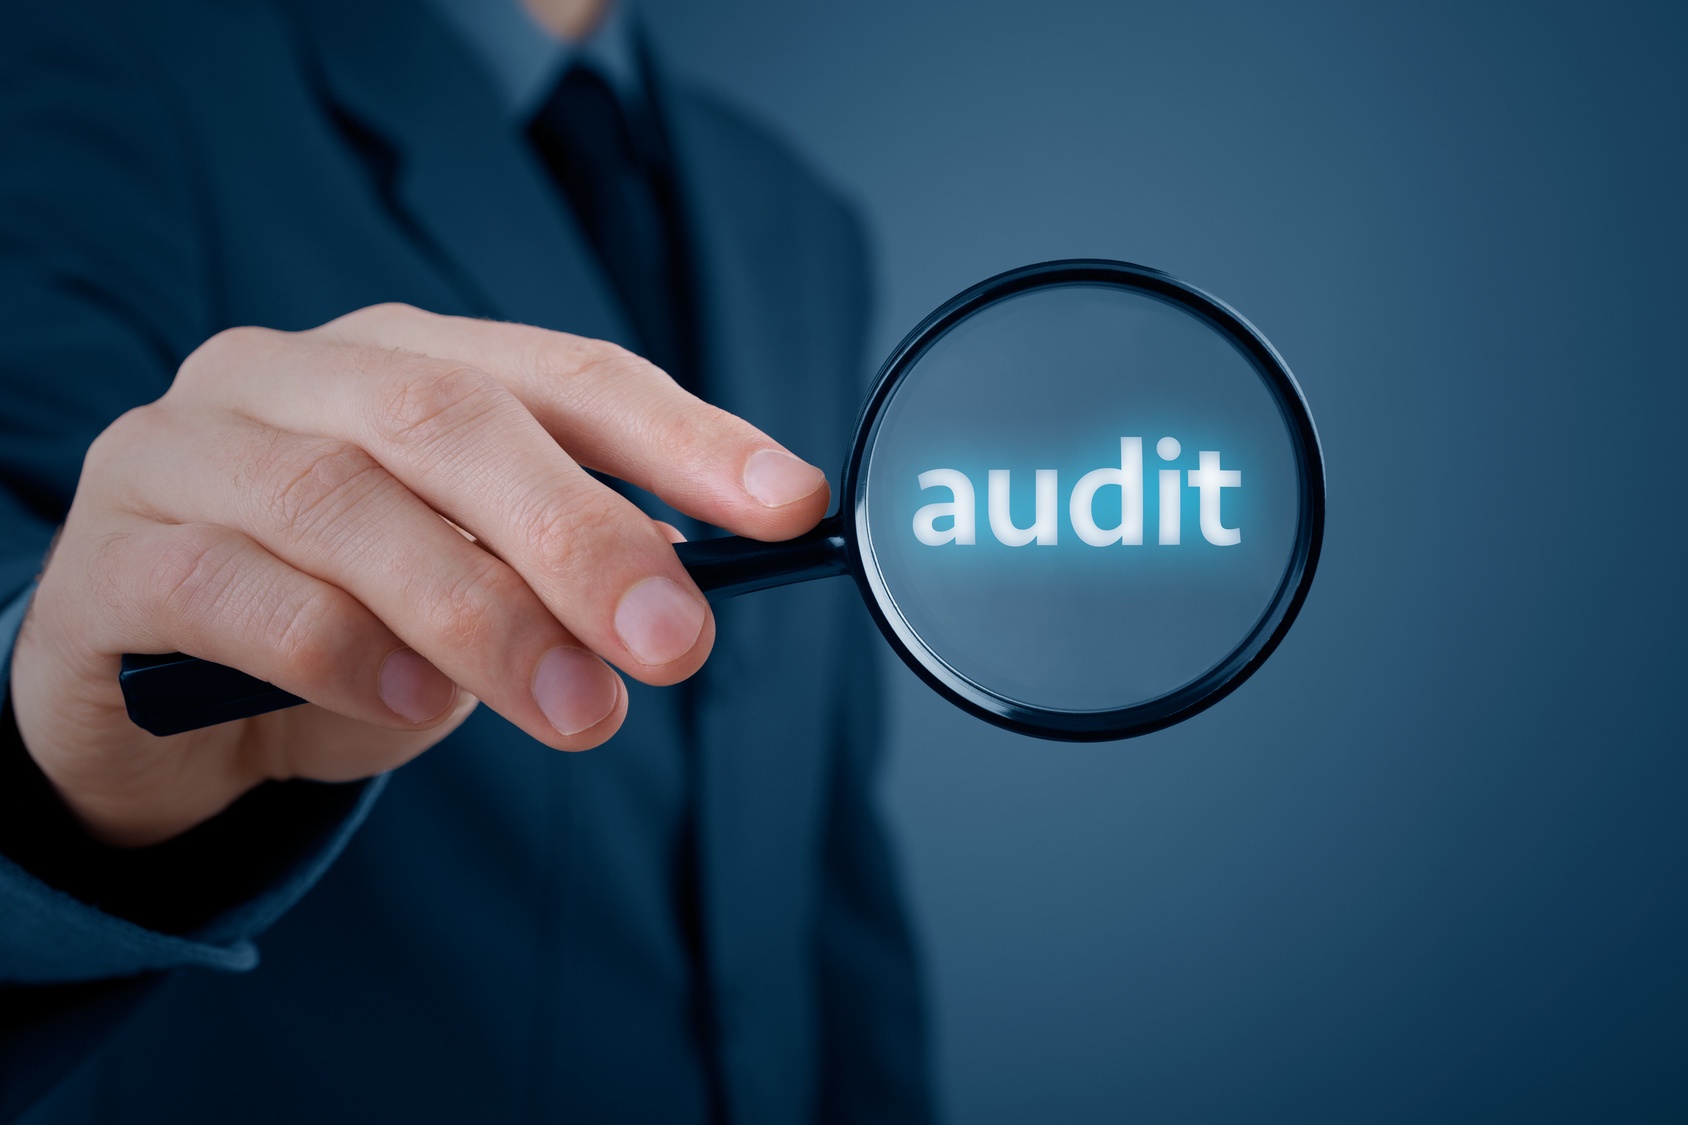 Success Story: Using A Media Audit to Guide Communications